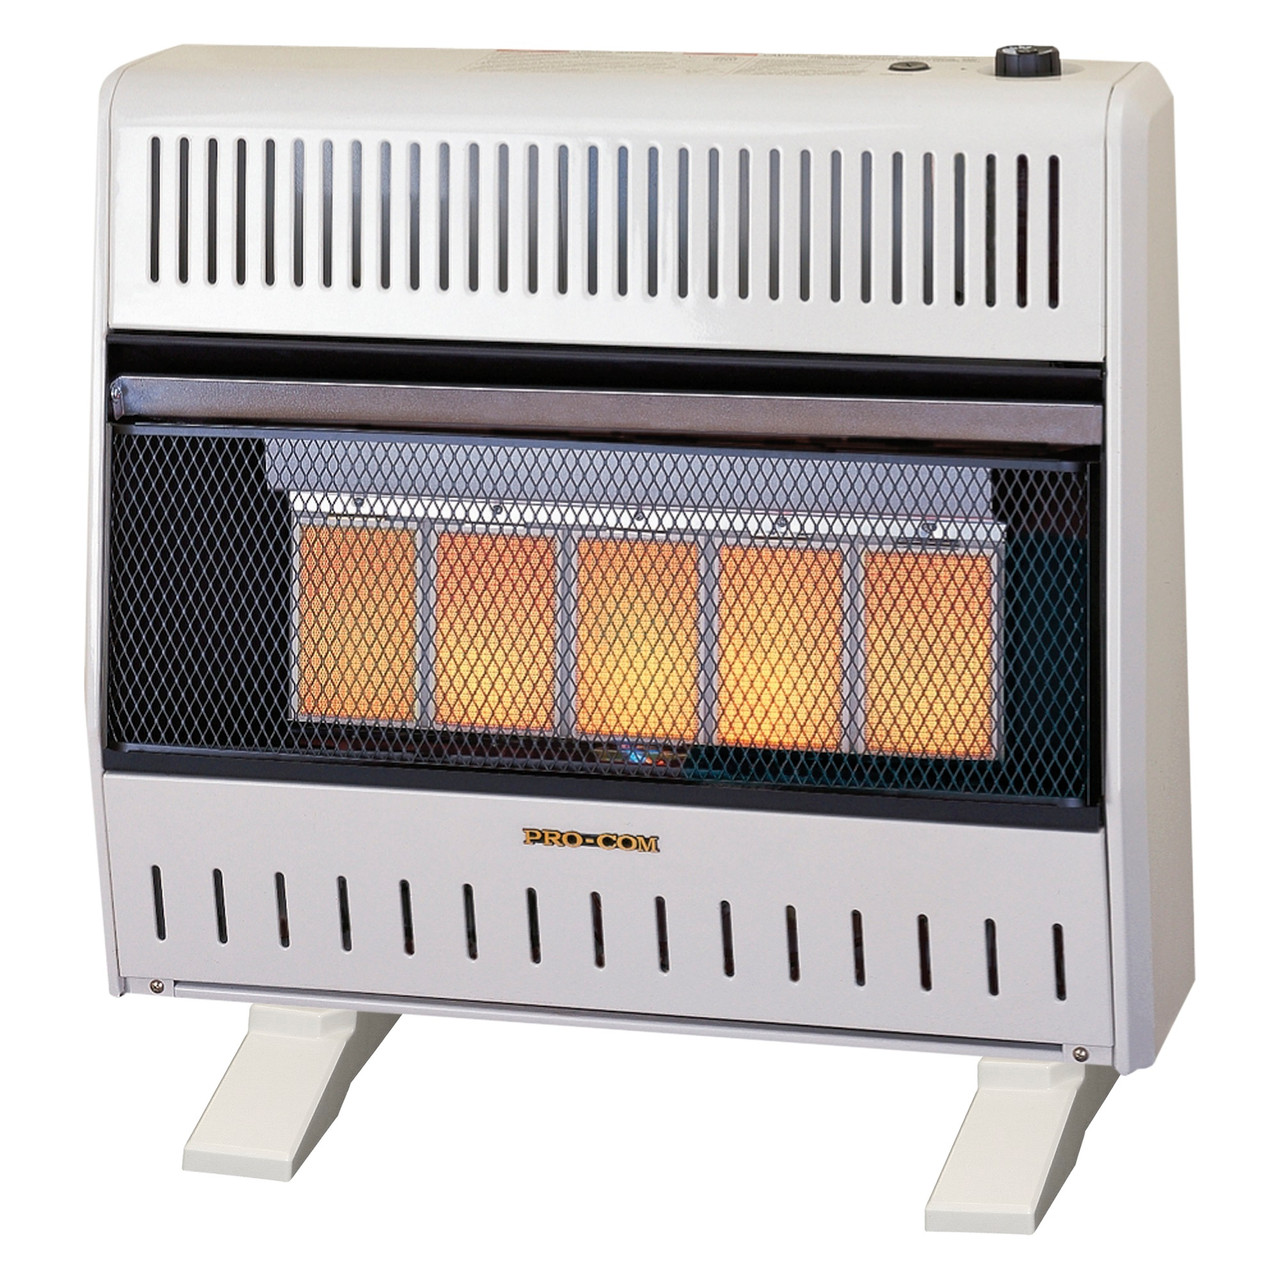 ProCom Heating Dual Fuel Ventless Infrared Gas Heater With Blower Base - 30,000 5 Plaque, T-Stat Control - Model# MNSD5TPA-BB Factory Buys Direct